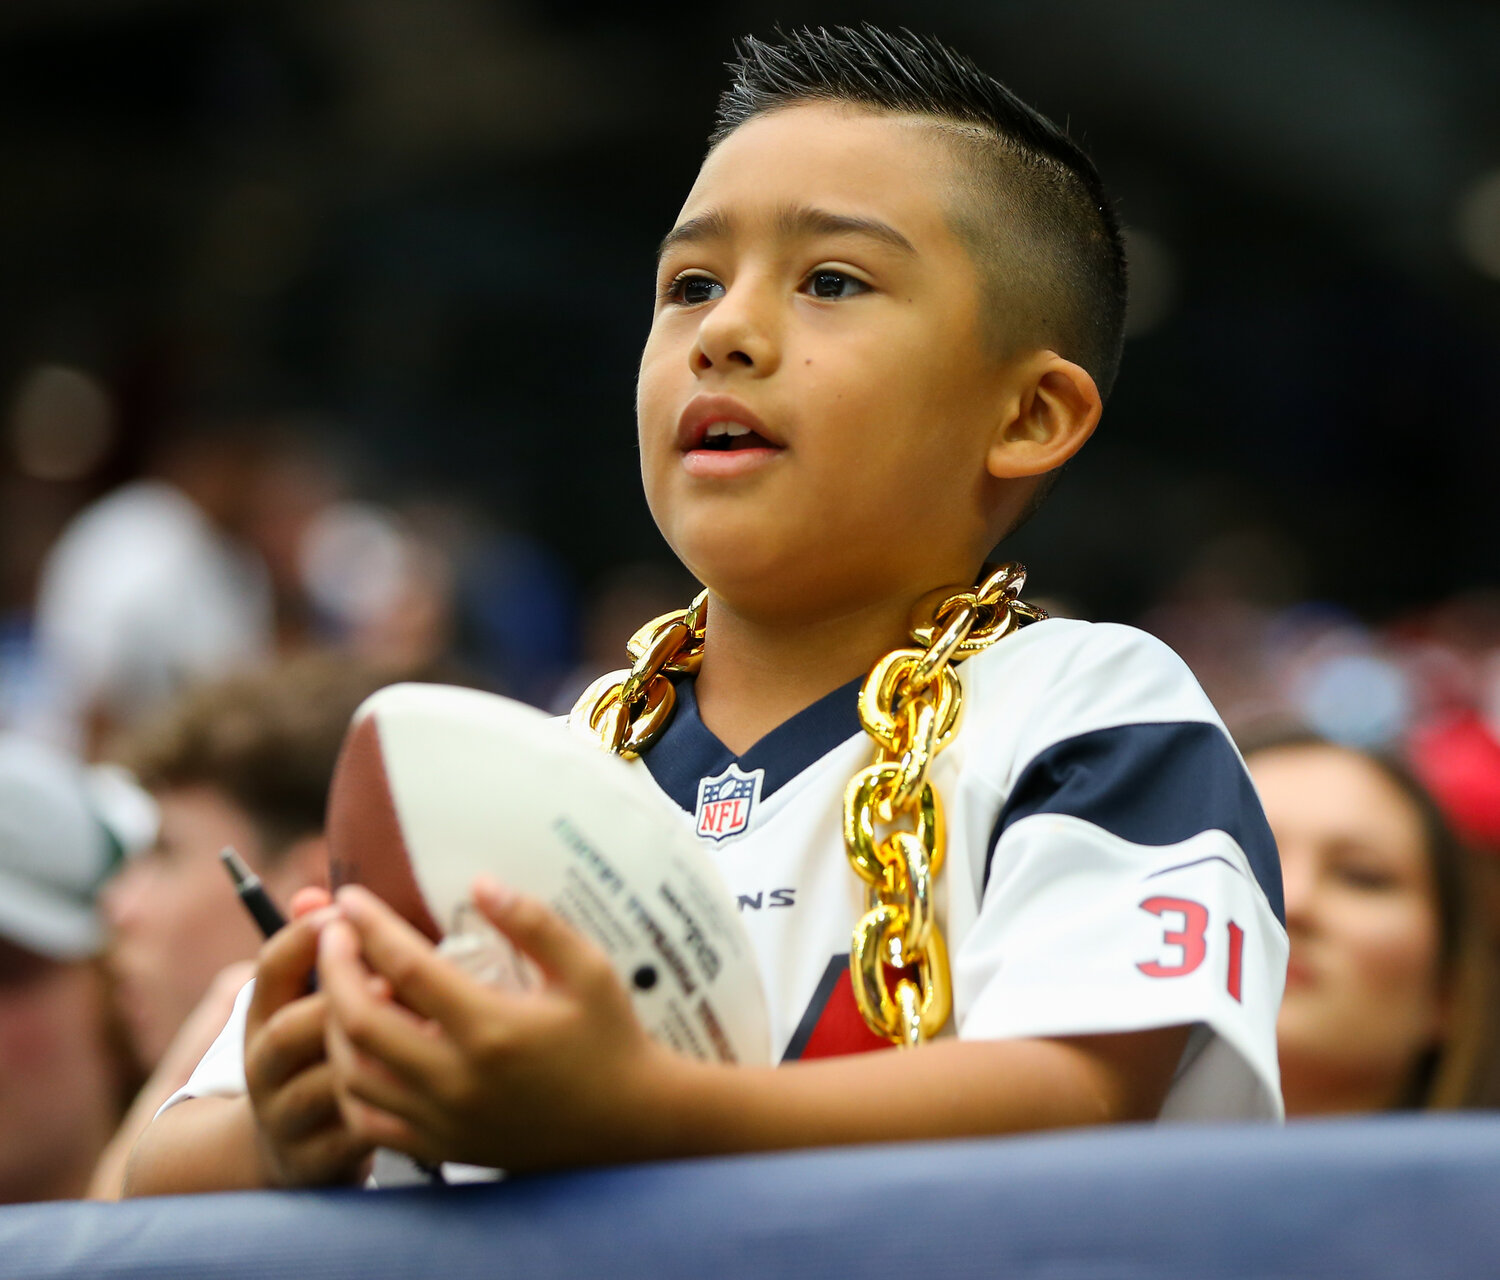 A young Houston Texans fan sits in the stands waiting for autograph opportunities during an NFL game between the Texans and the Colts on September 17, 2023 in Houston. The Colts won, 31-20.